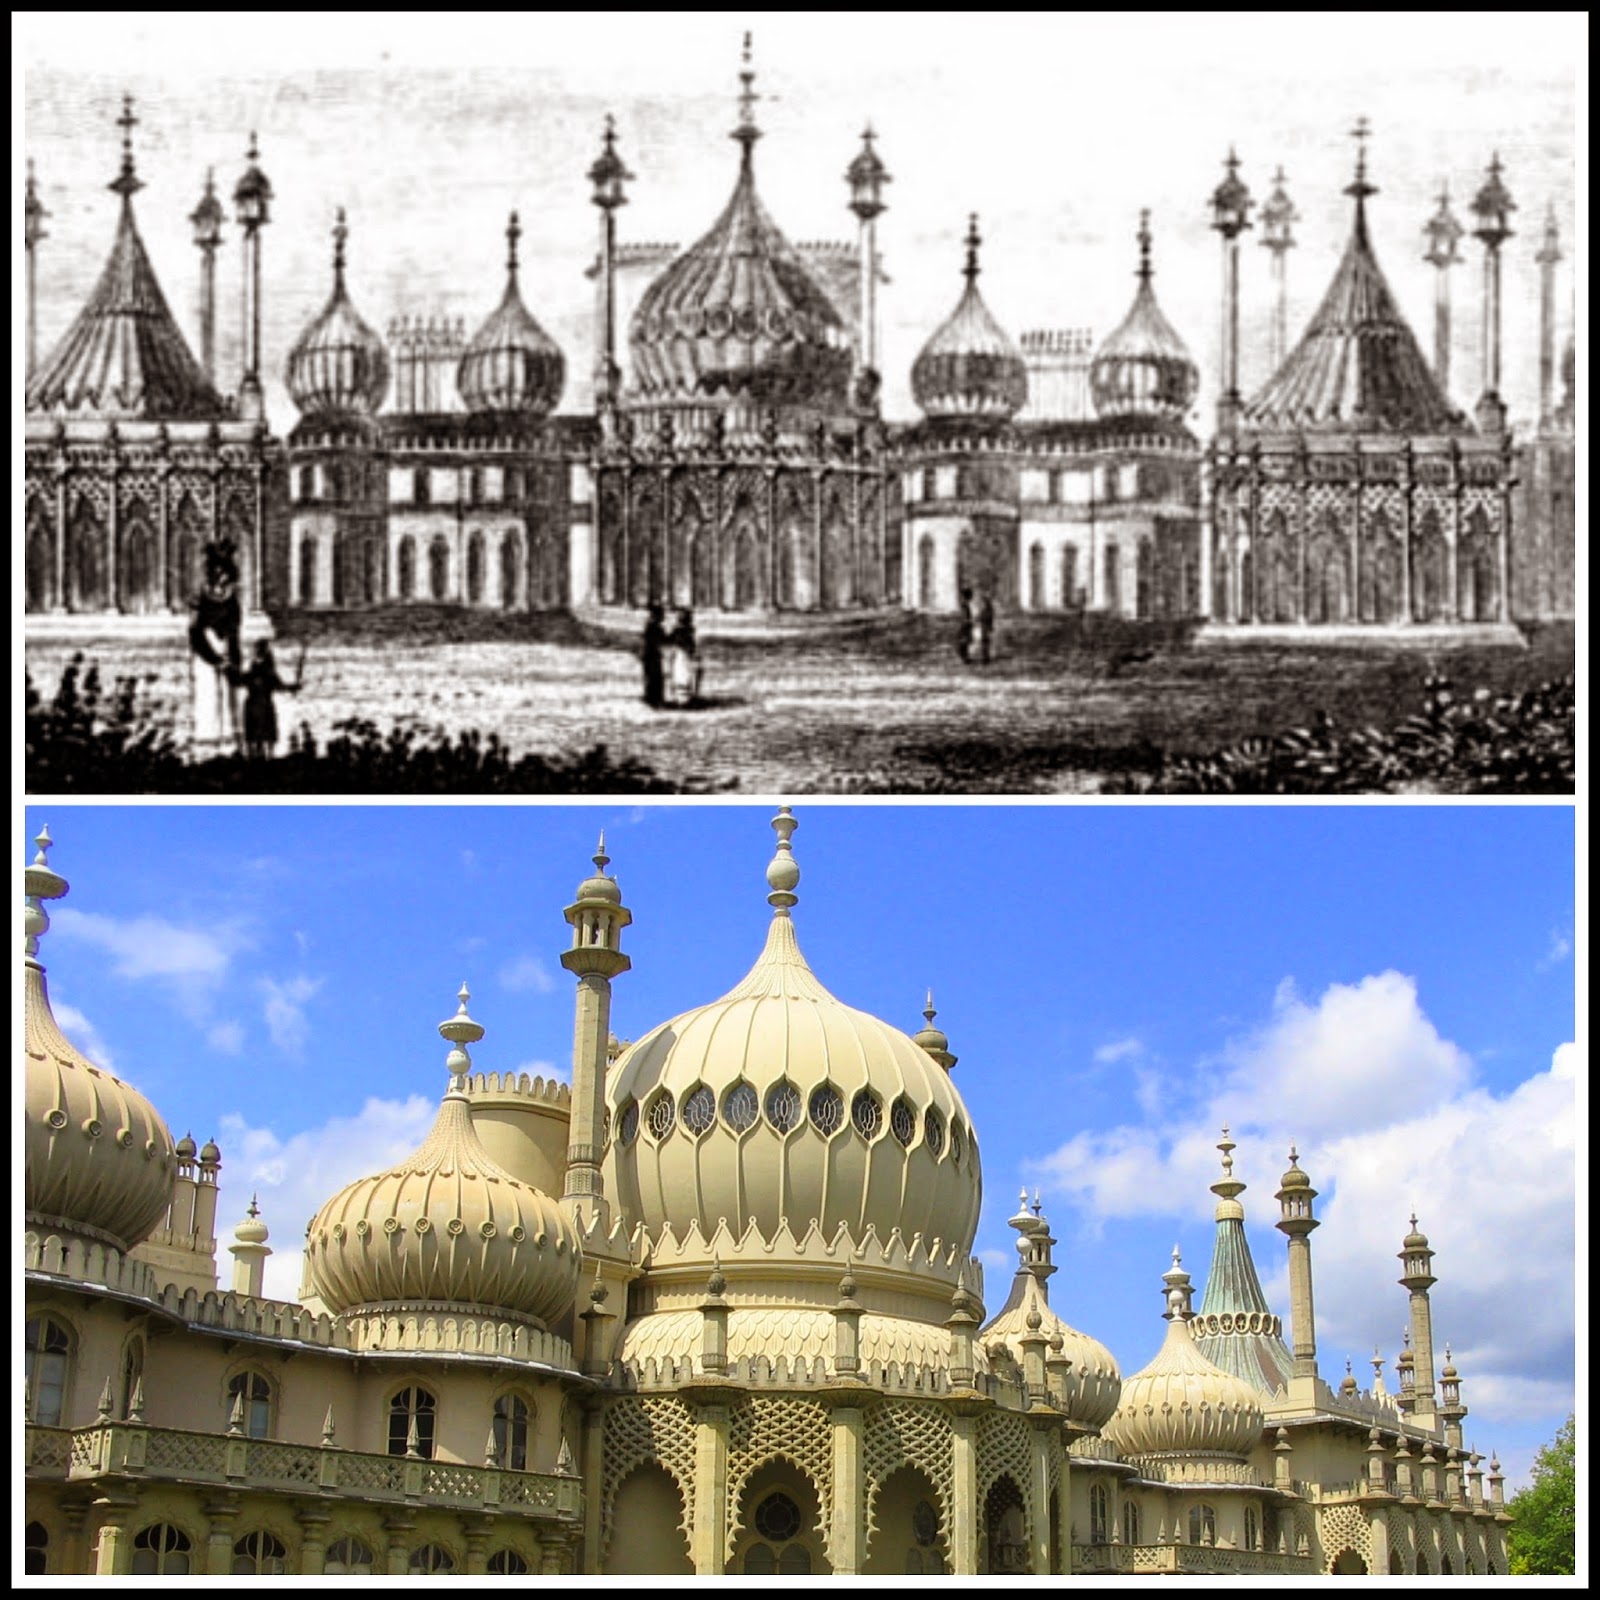 Brighton Pavilion  Top: From History of Brighton and its environs by R Sickelmore (1827)  Bottom: Brighton Pavilion today © Andrew Knowles